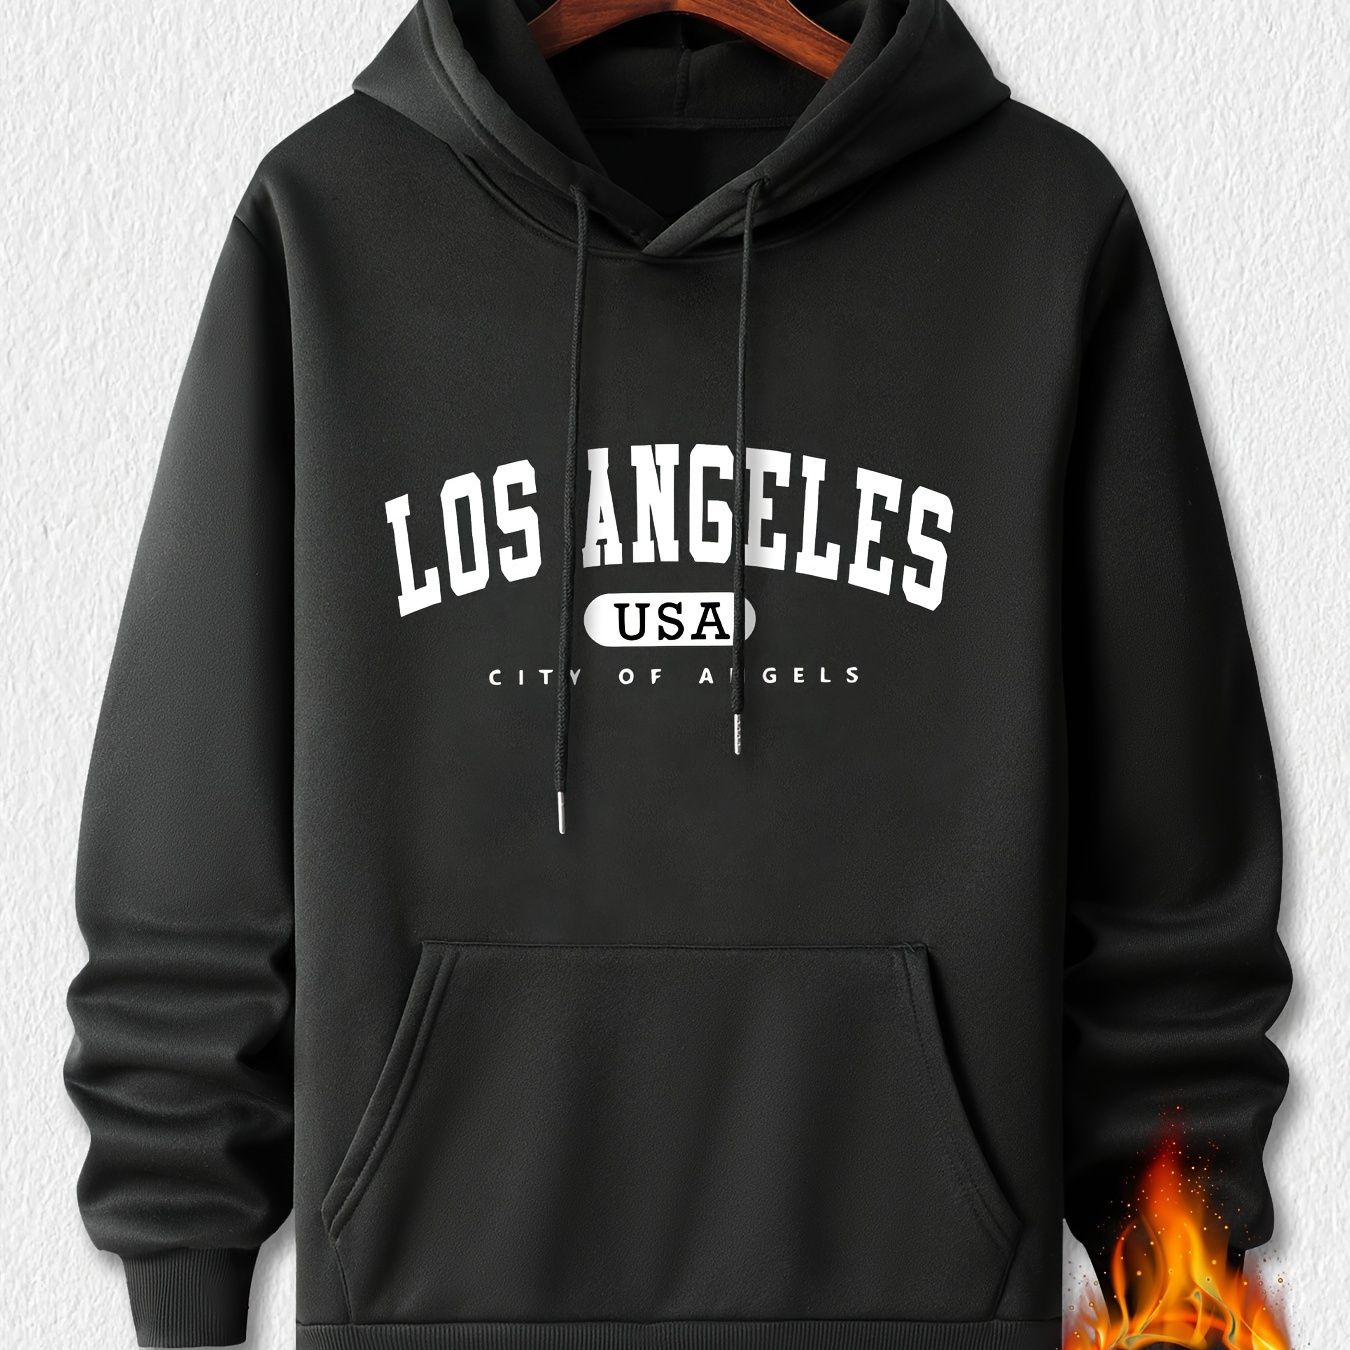 

Los Angeles Print Hoodie, Cool Hoodies For Men, Men's Casual Graphic Design Pullover Hooded Sweatshirt With Kangaroo Pocket Streetwear For Winter Fall, As Gifts